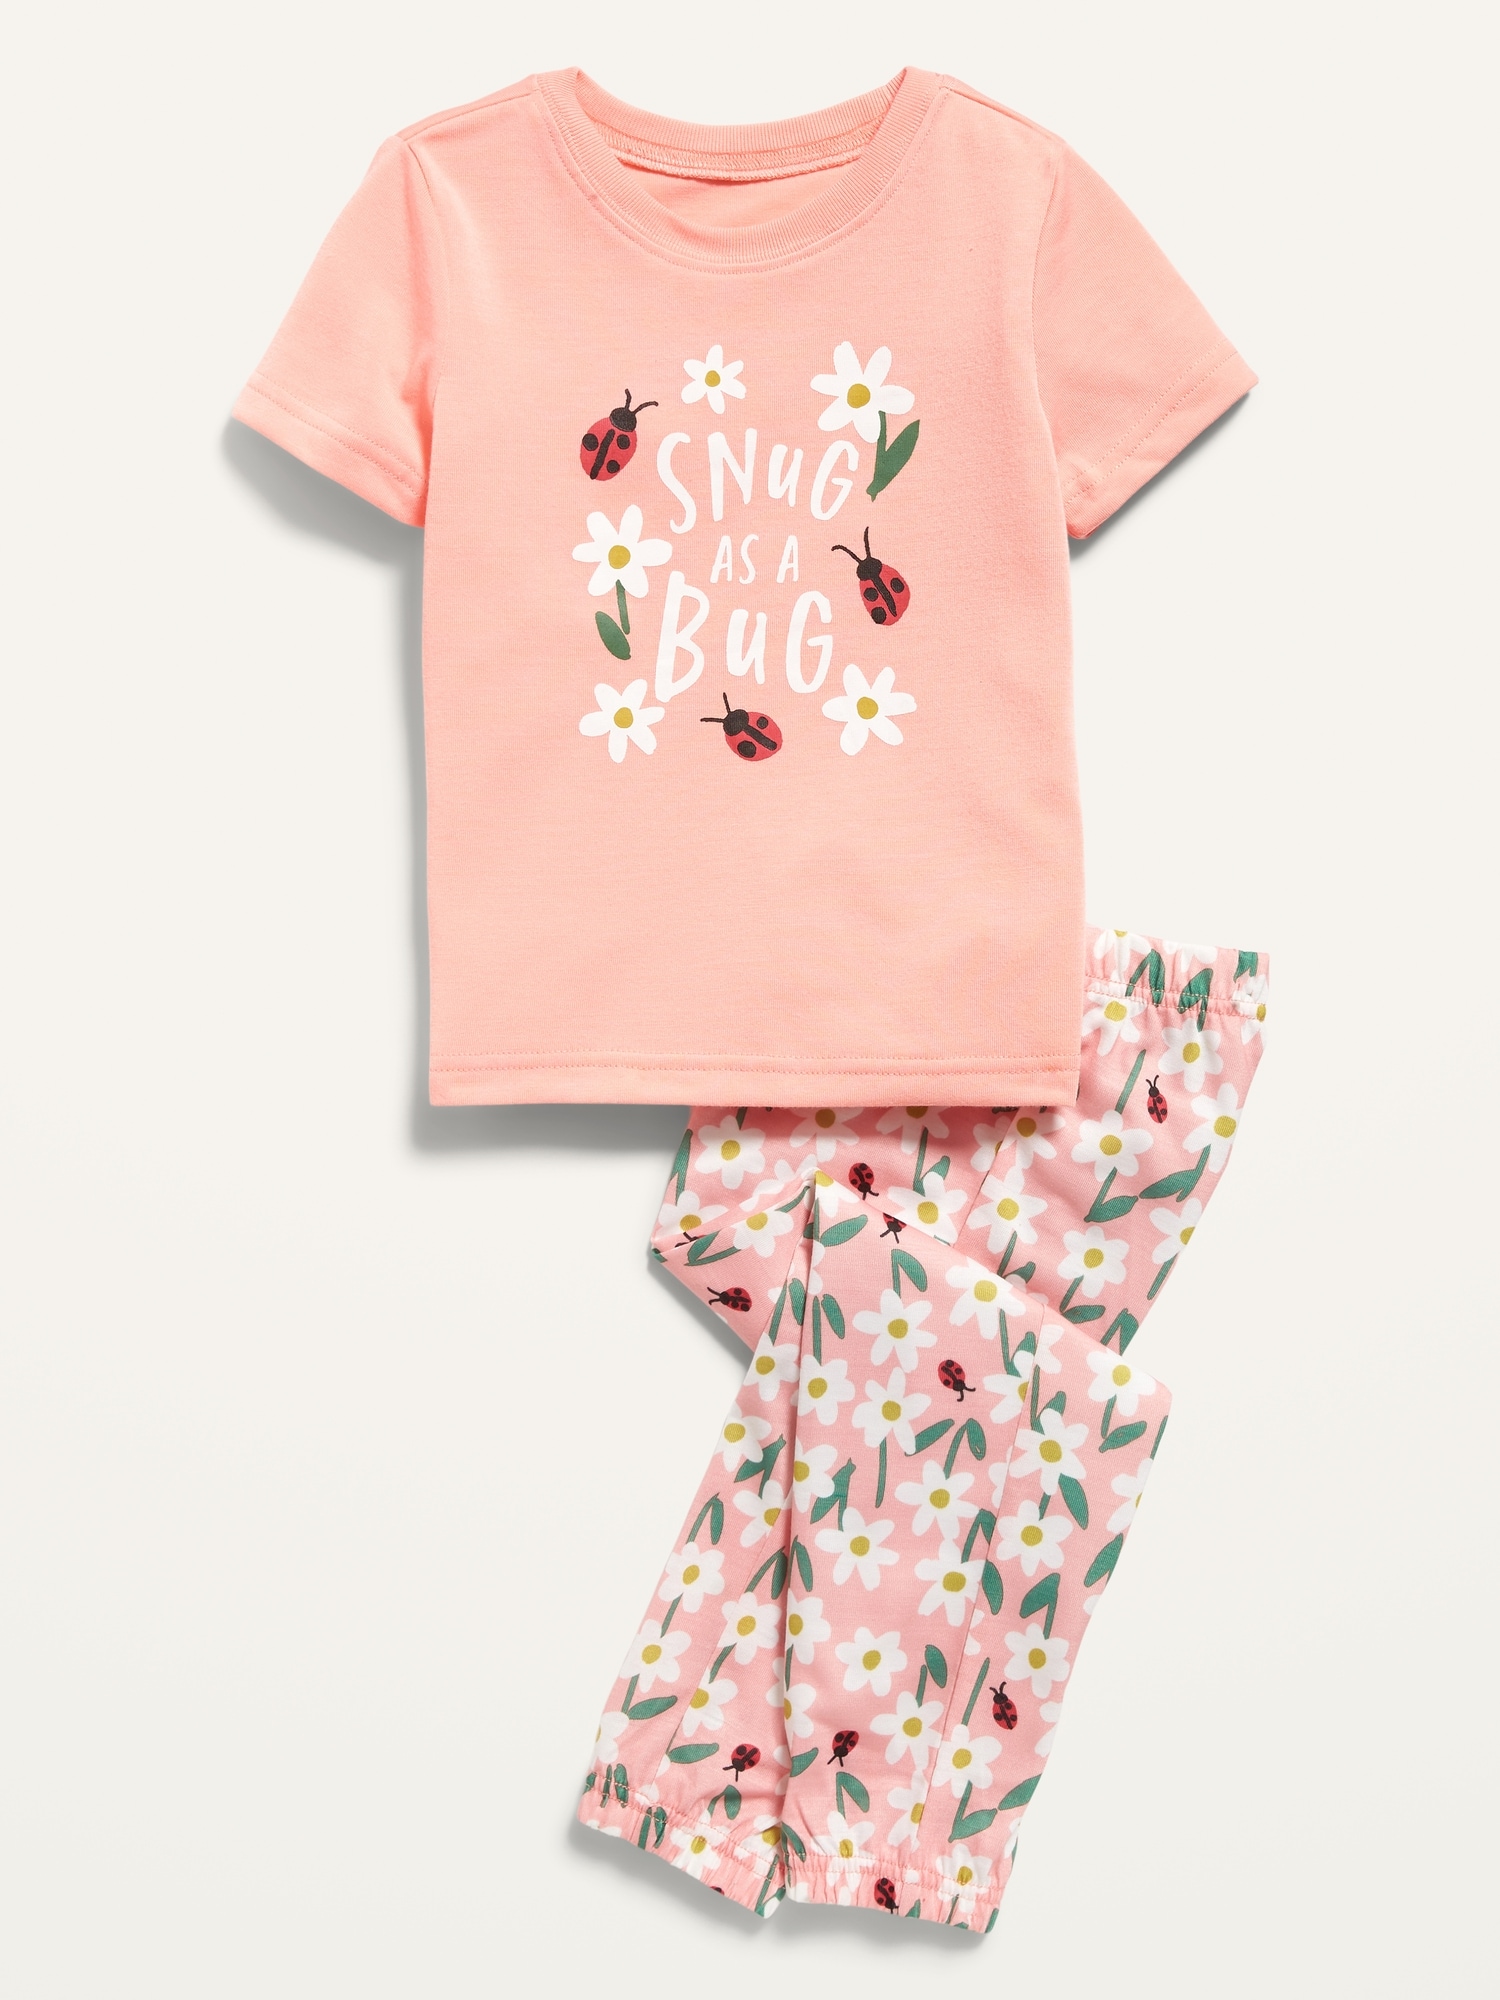 Unisex Loose-Fit Graphic Pajama Set for Toddler & Baby | Old Navy